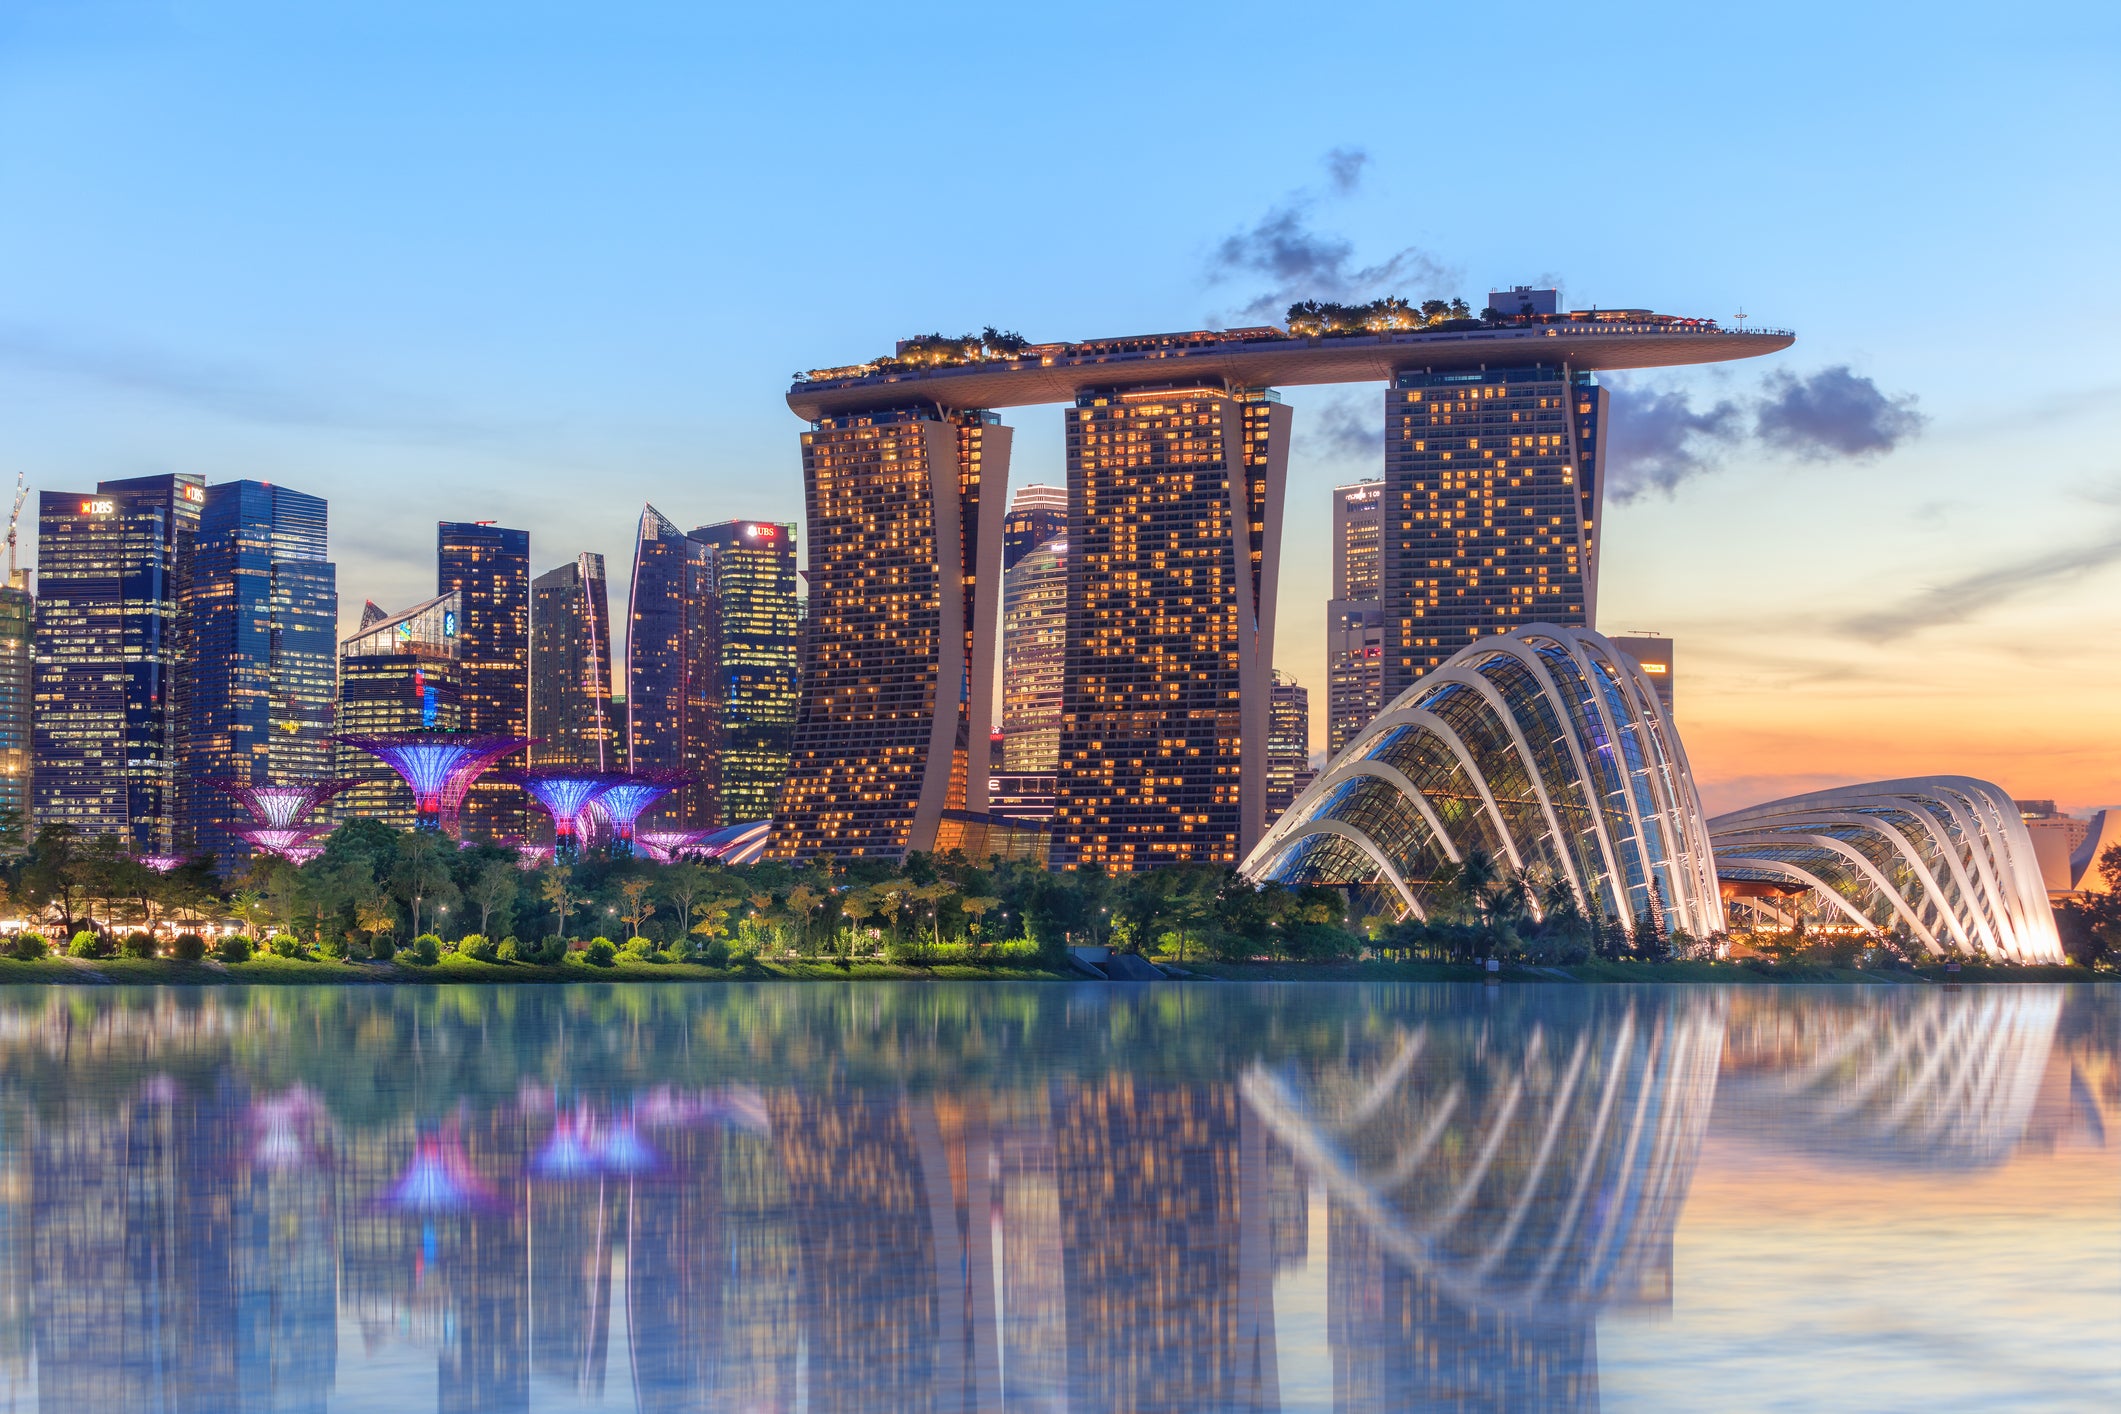 Singapore tourist board has refuted the claims